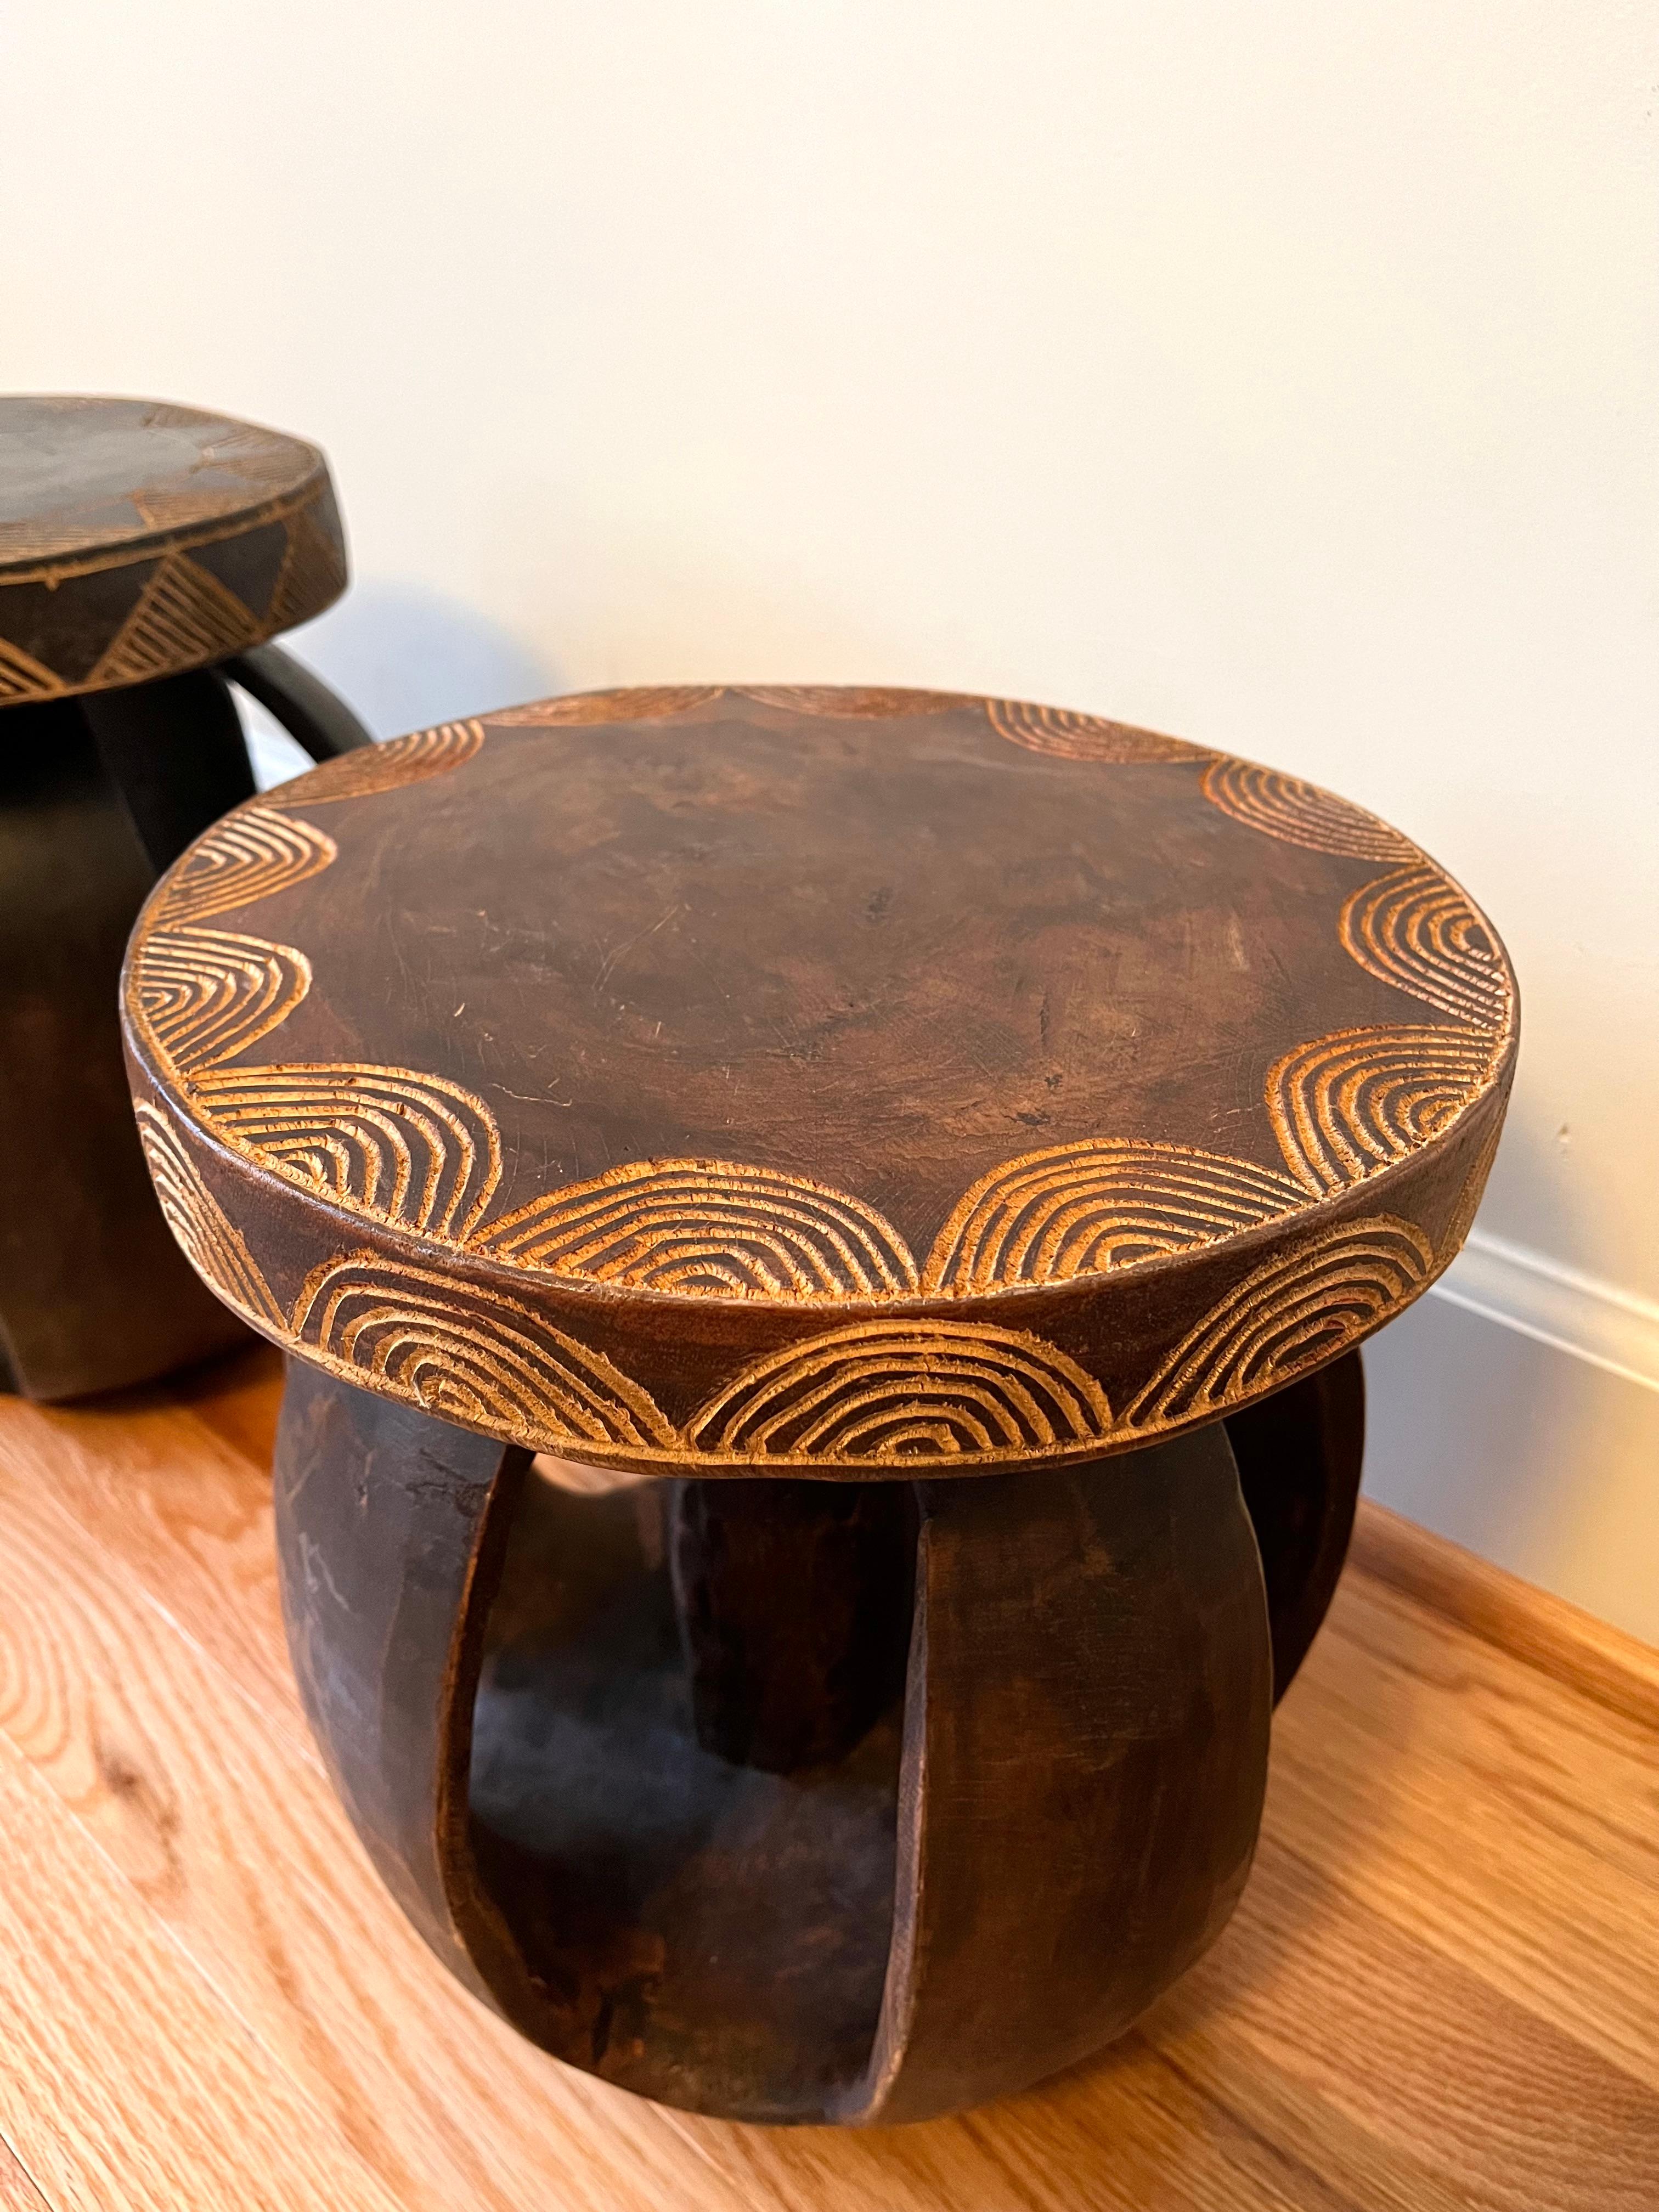 These Senufo stools are hand carved from hardwood by the Senufo Tribe in the Ivory Coast. 

Senufo stools are known for their stocky tapered legs and concave tops and are traditionally carved from one block of wood. 

Artisan crafted and due to